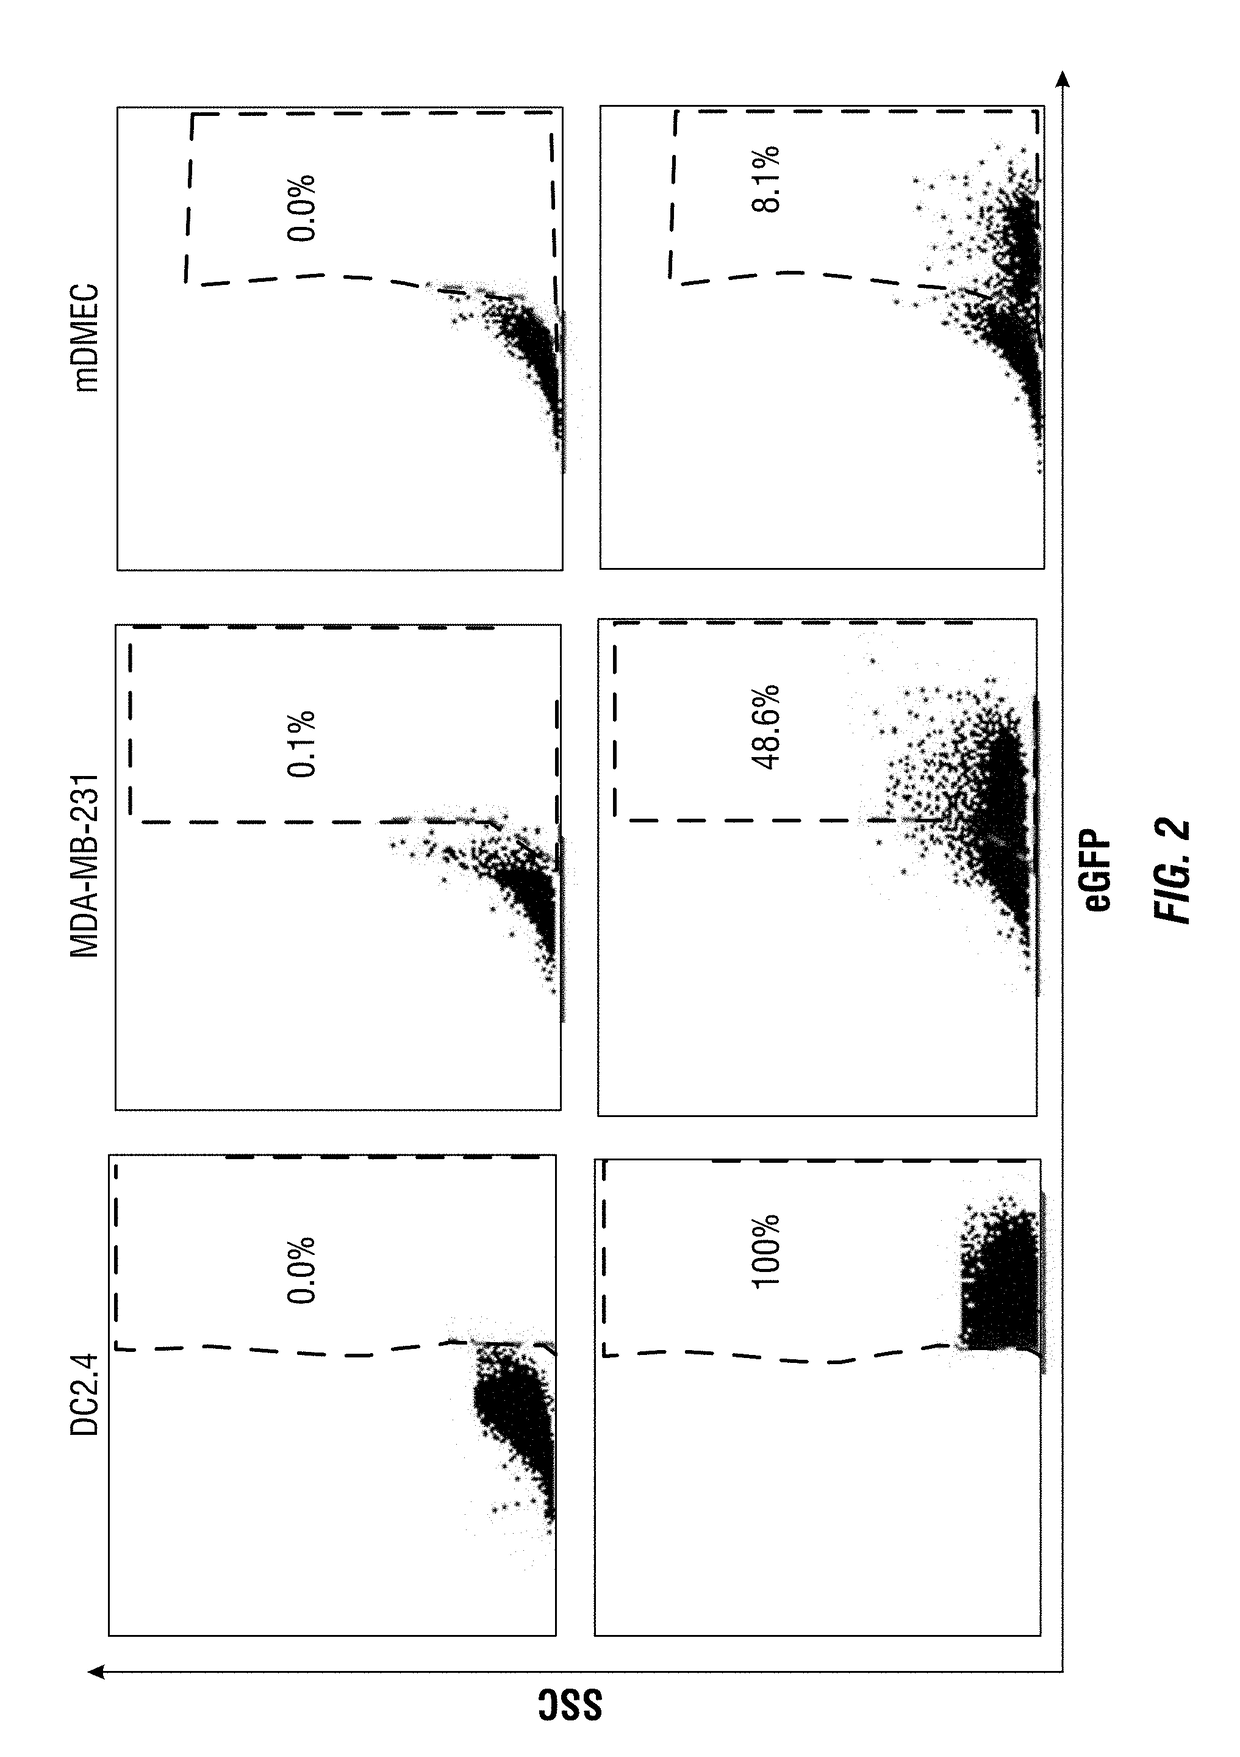 Core/Shell Structure Platform For Immunotherapy